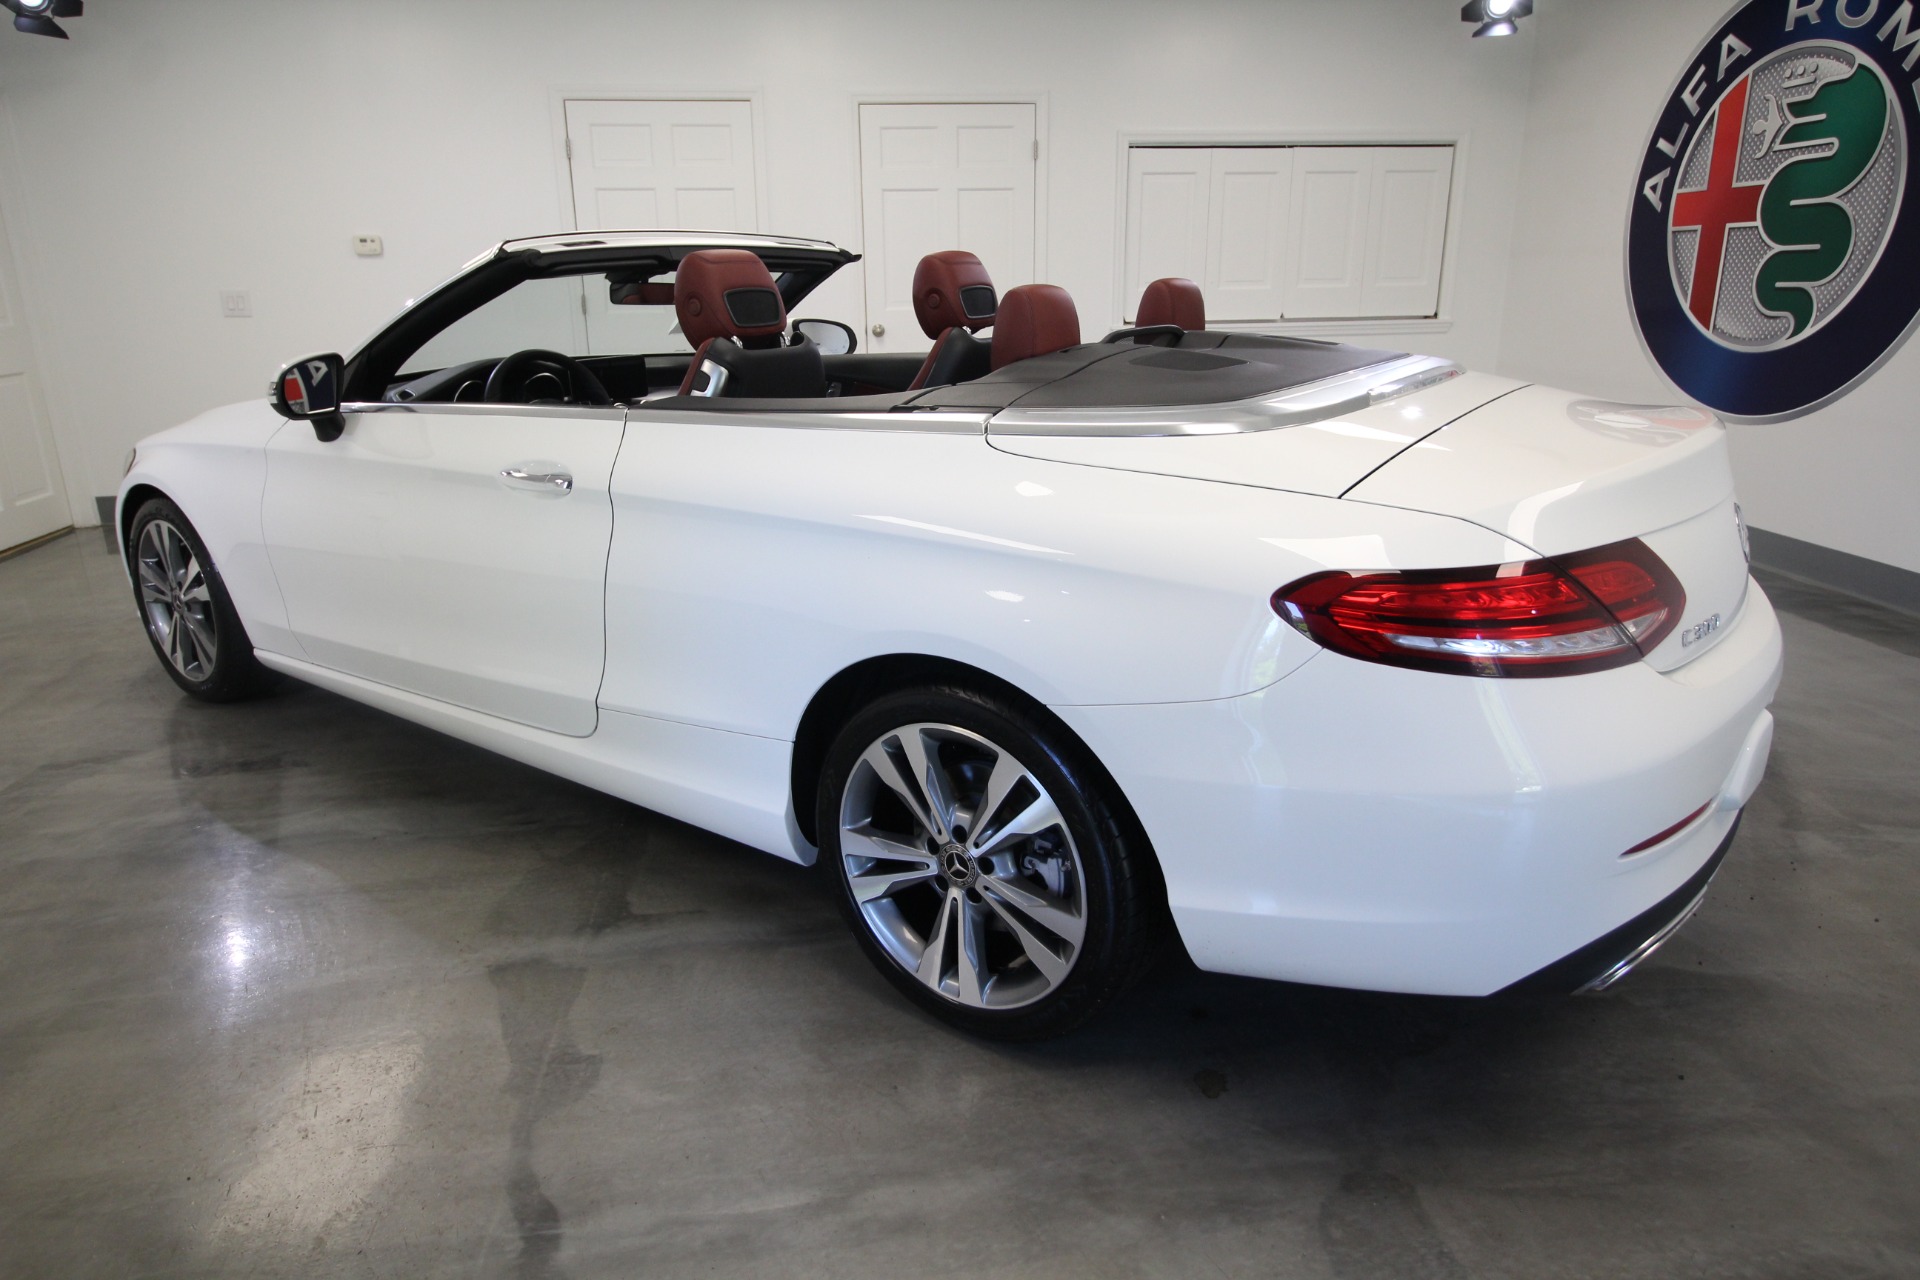 Used 2019 White Mercedes-Benz C-Class C300 4Matic Convertible Gorgeous Color Combo | Albany, NY